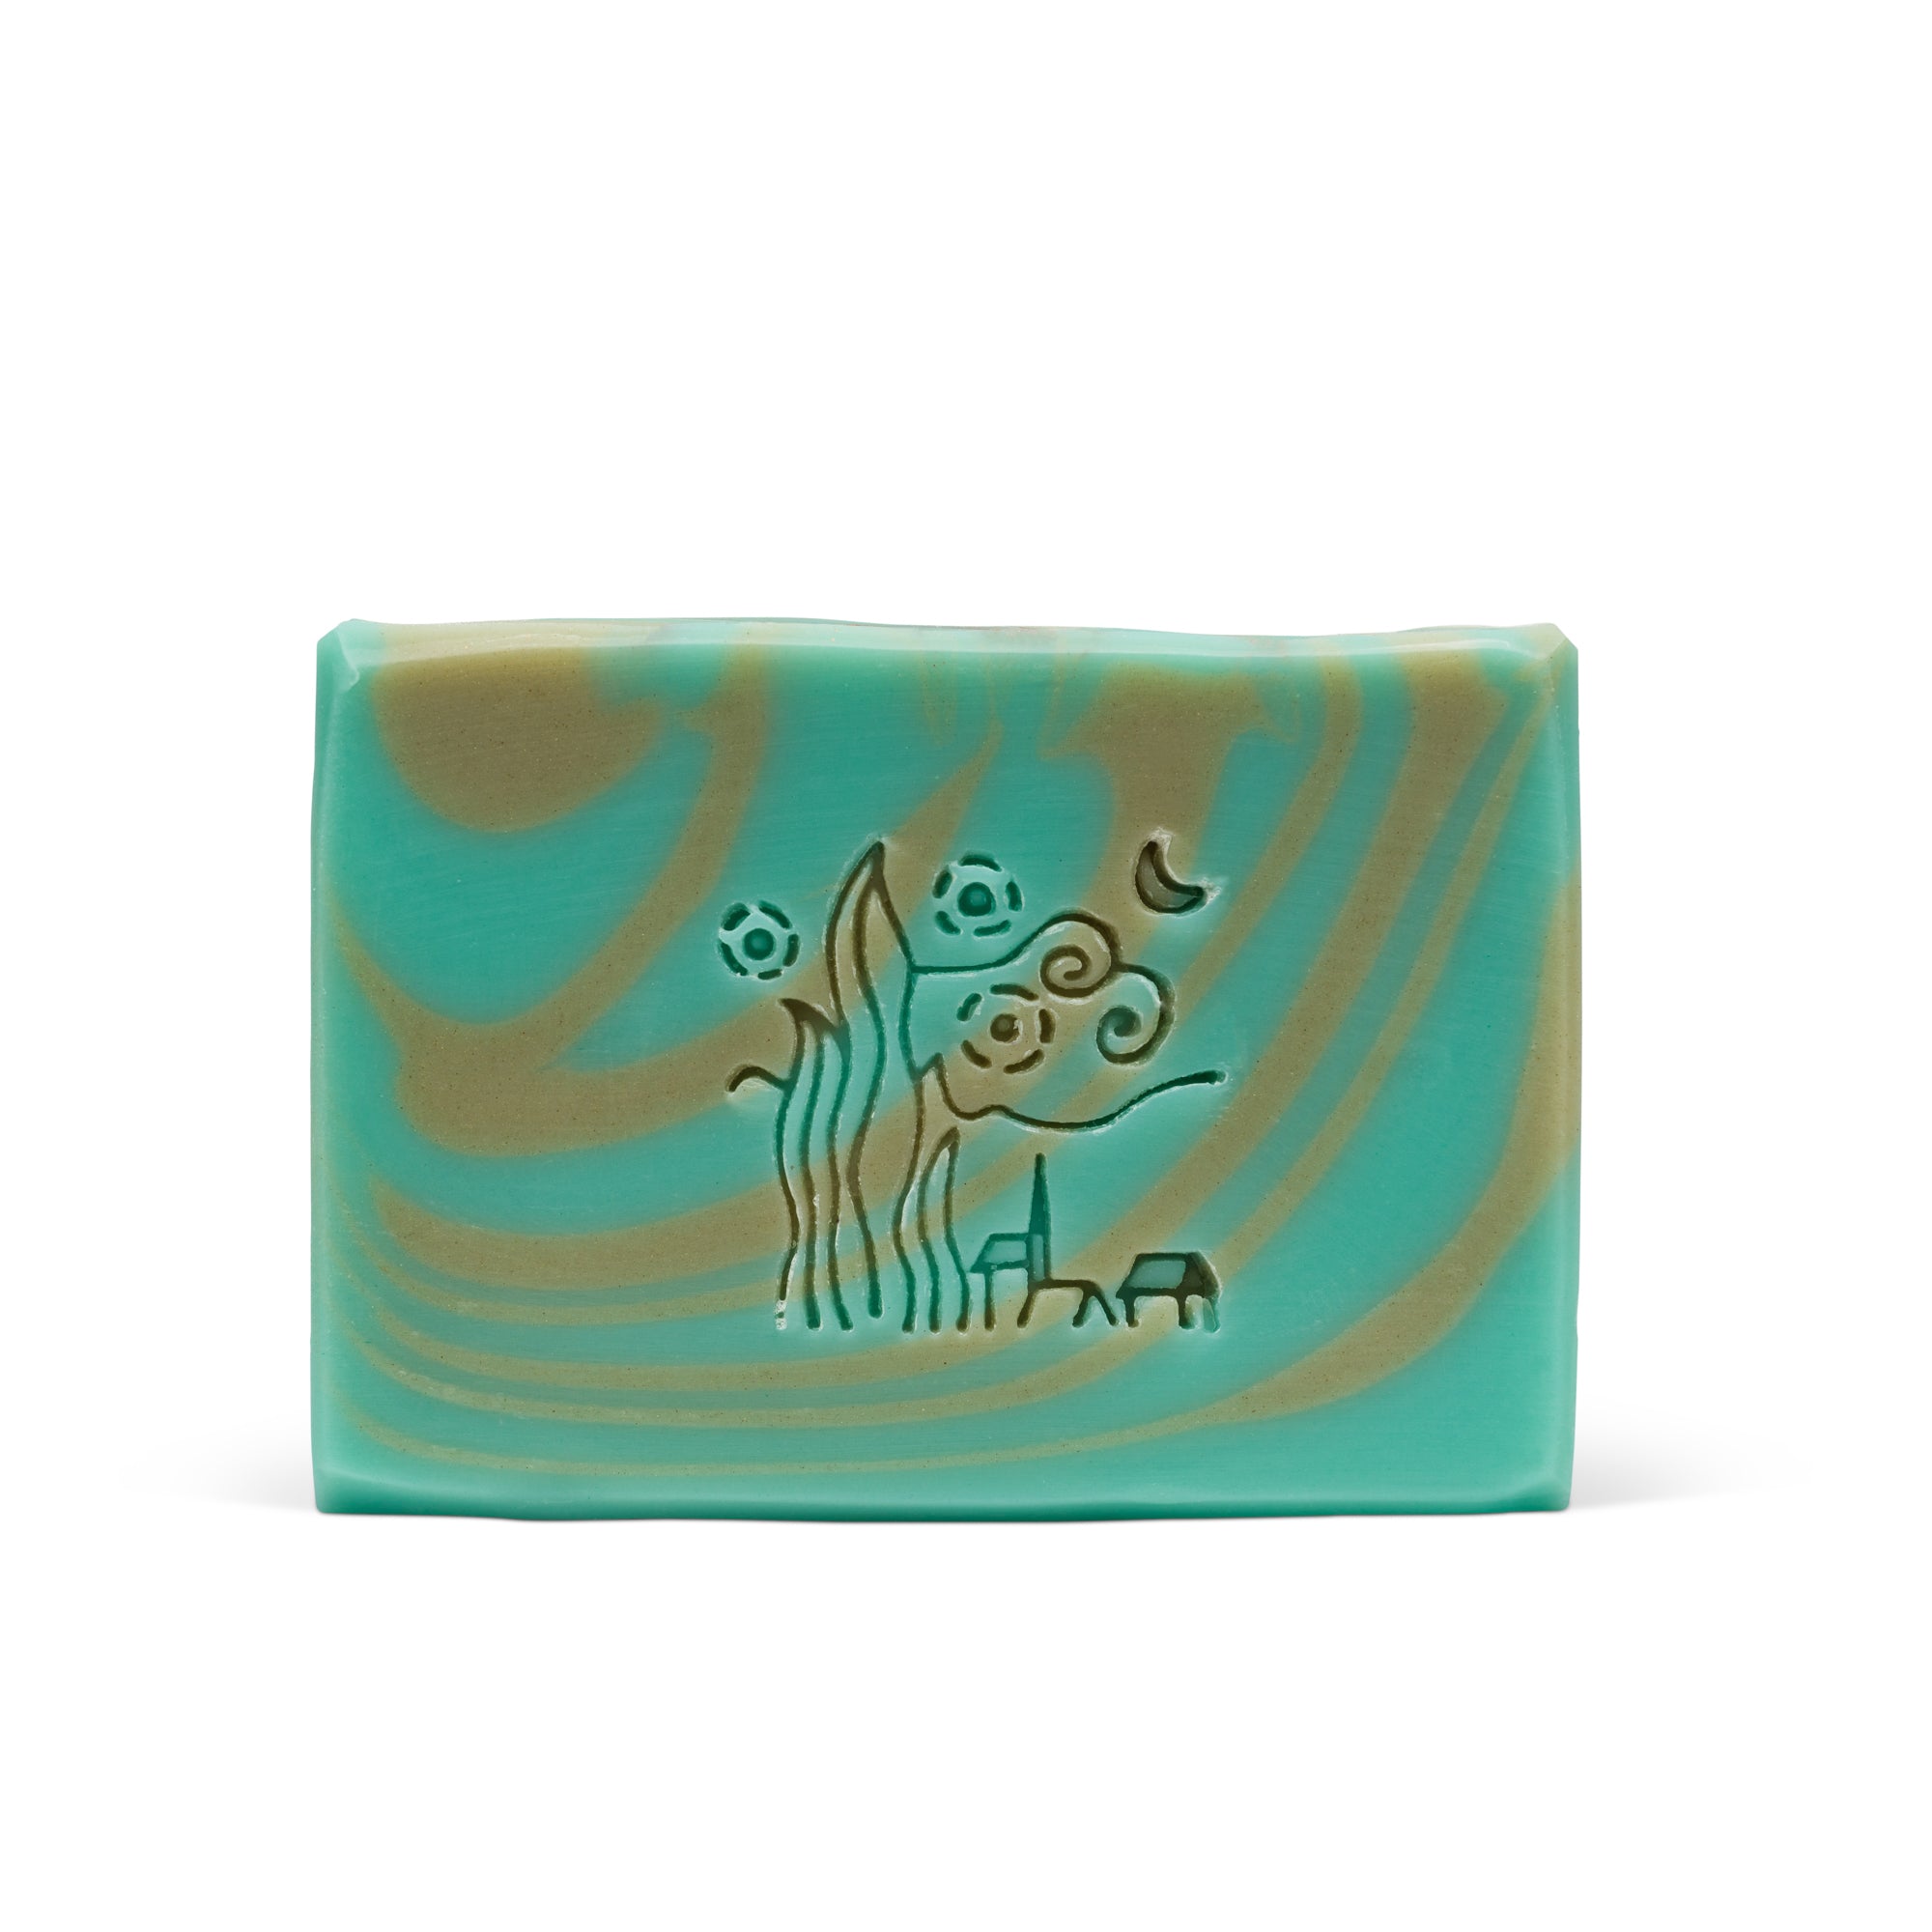 Sea Kelp Soap, Sea green with gold sea kelp stripes. Imprinted with a house by the sea with a crescent moon in the sky.La Jolla Soap Company